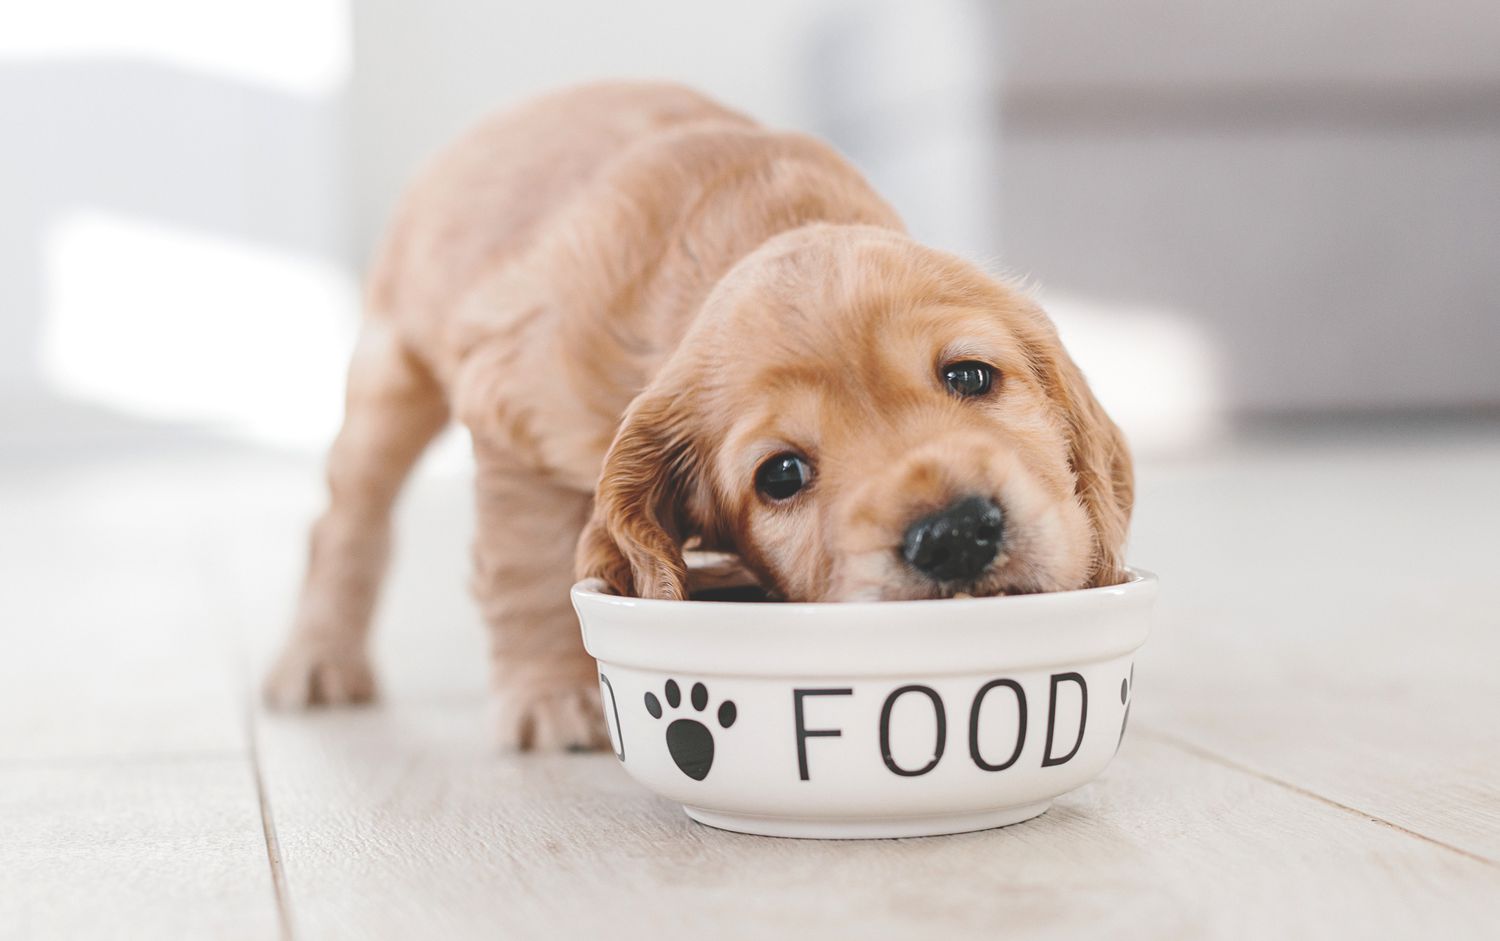 Cocker Spaniel puppy eating dog food from a bowl